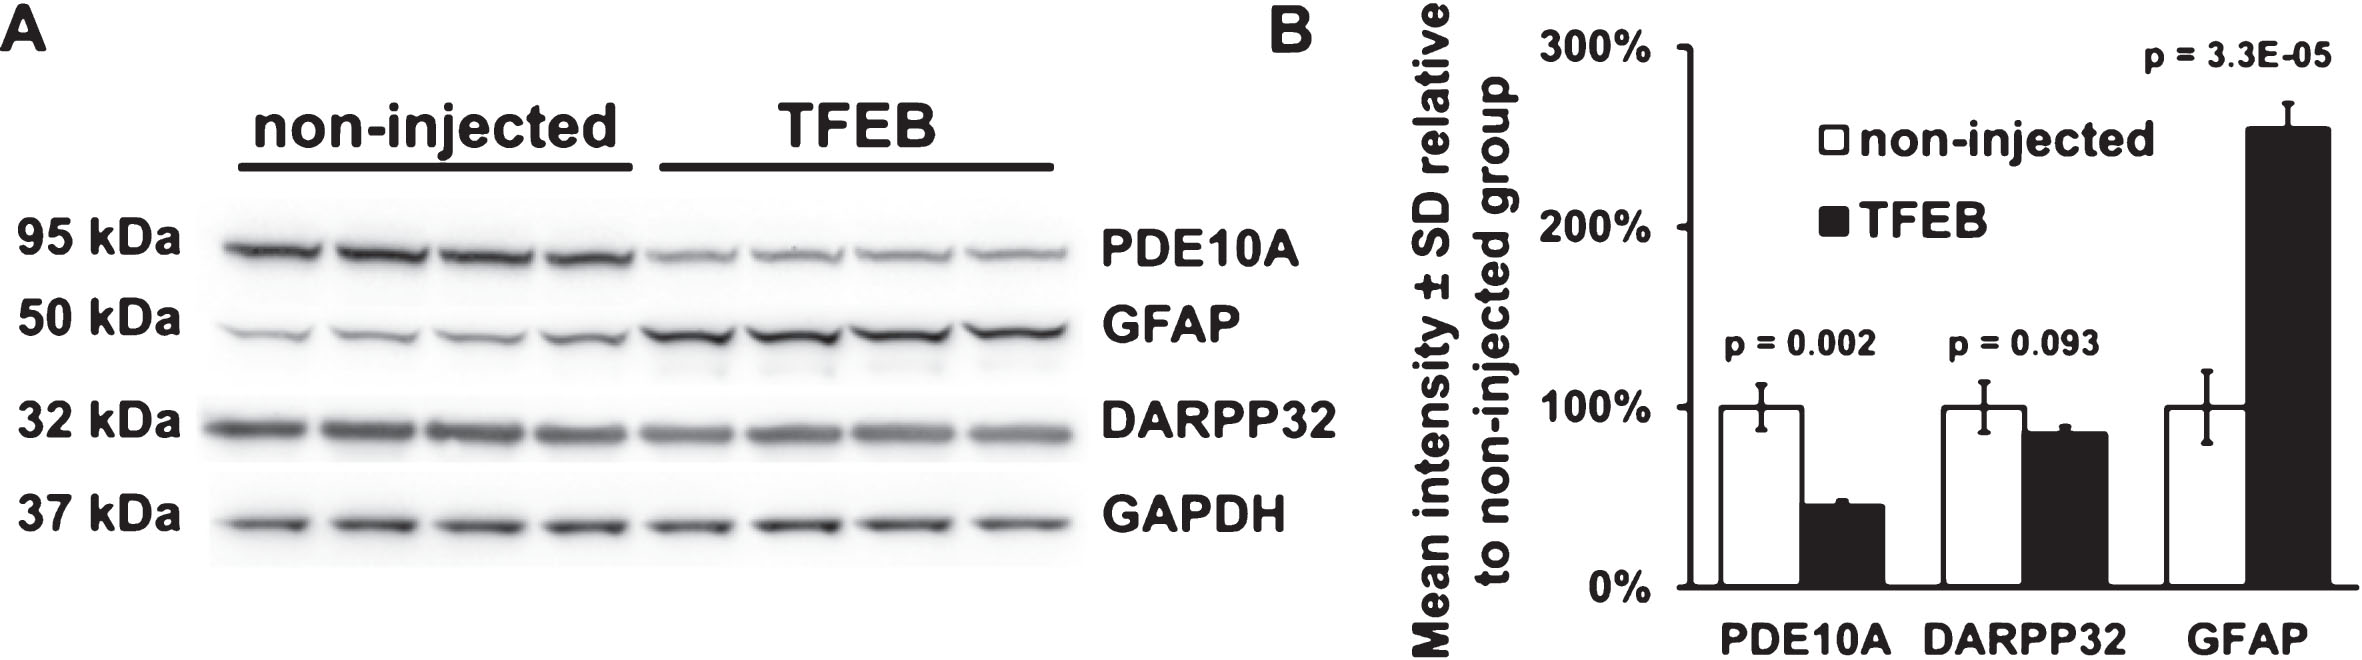 Western blot analysis of DARPP32, GFAP, PDE10A in striatal crude homogenates of mice injected with either AAV hSyn1 TFEB-HA or non-injected. A) Western blots for DARPP32, GFAP and PDE10A, GAPDH was used as a loading control. B) Bar graphs show results of densitometry for Western blots in A. All mice are age matched and the injected mice were examined at 2 months post-injection. Each column represents sample from a different mouse, N = 4 mice per treatment group, p-values from unpaired t-test.